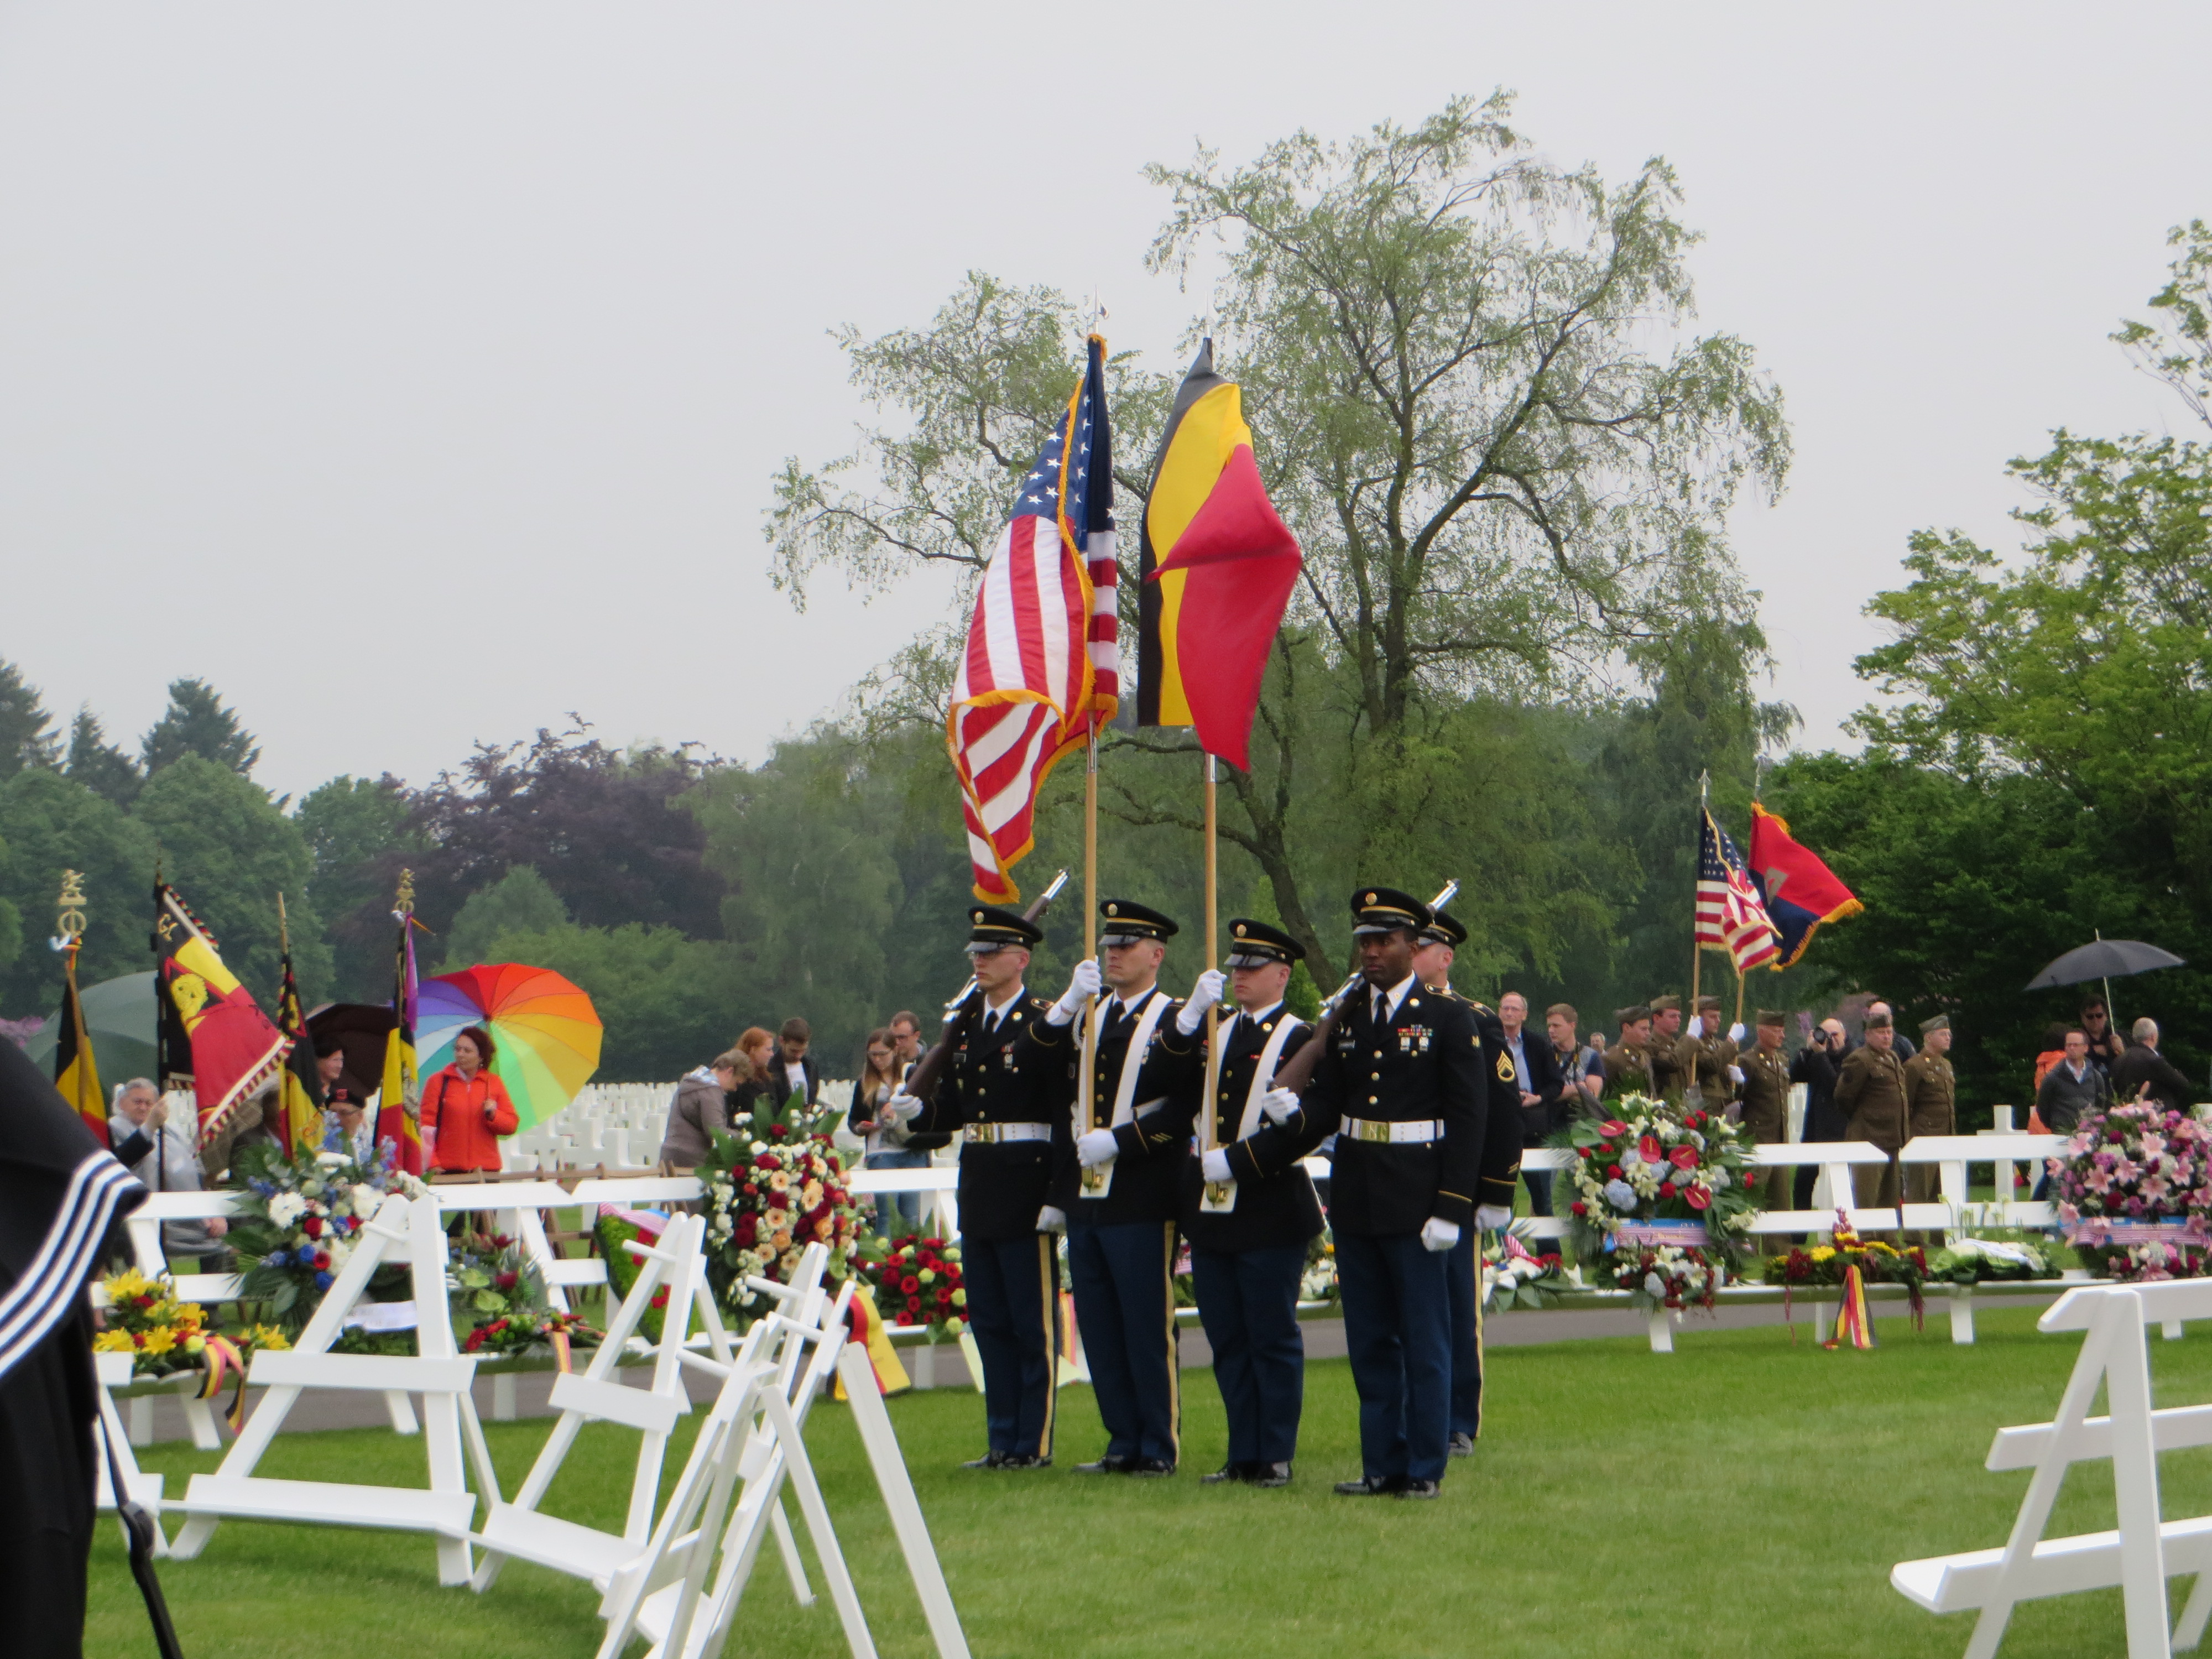 A U.S. Color Guard stands at attention during the ceremony.